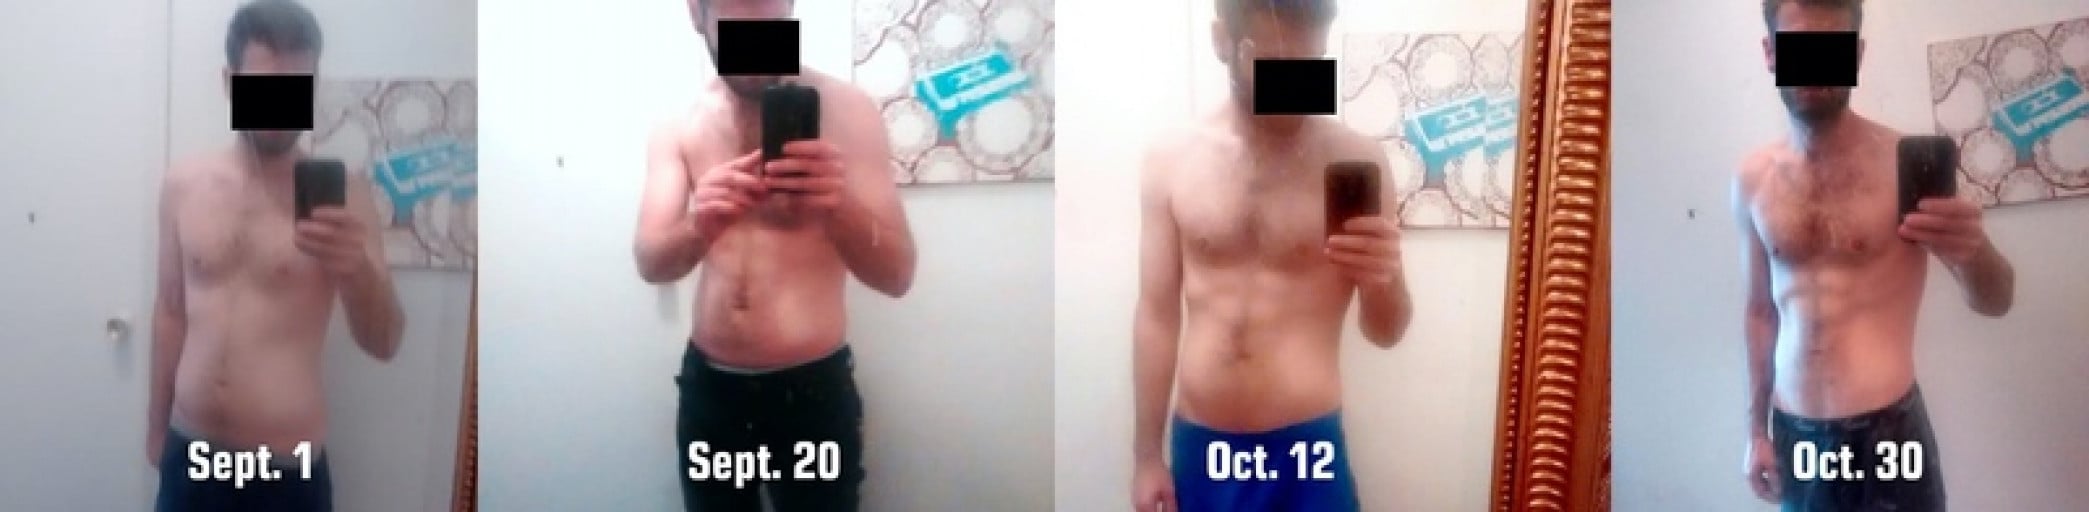 A progress pic of a 5'8" man showing a fat loss from 154 pounds to 138 pounds. A respectable loss of 16 pounds.